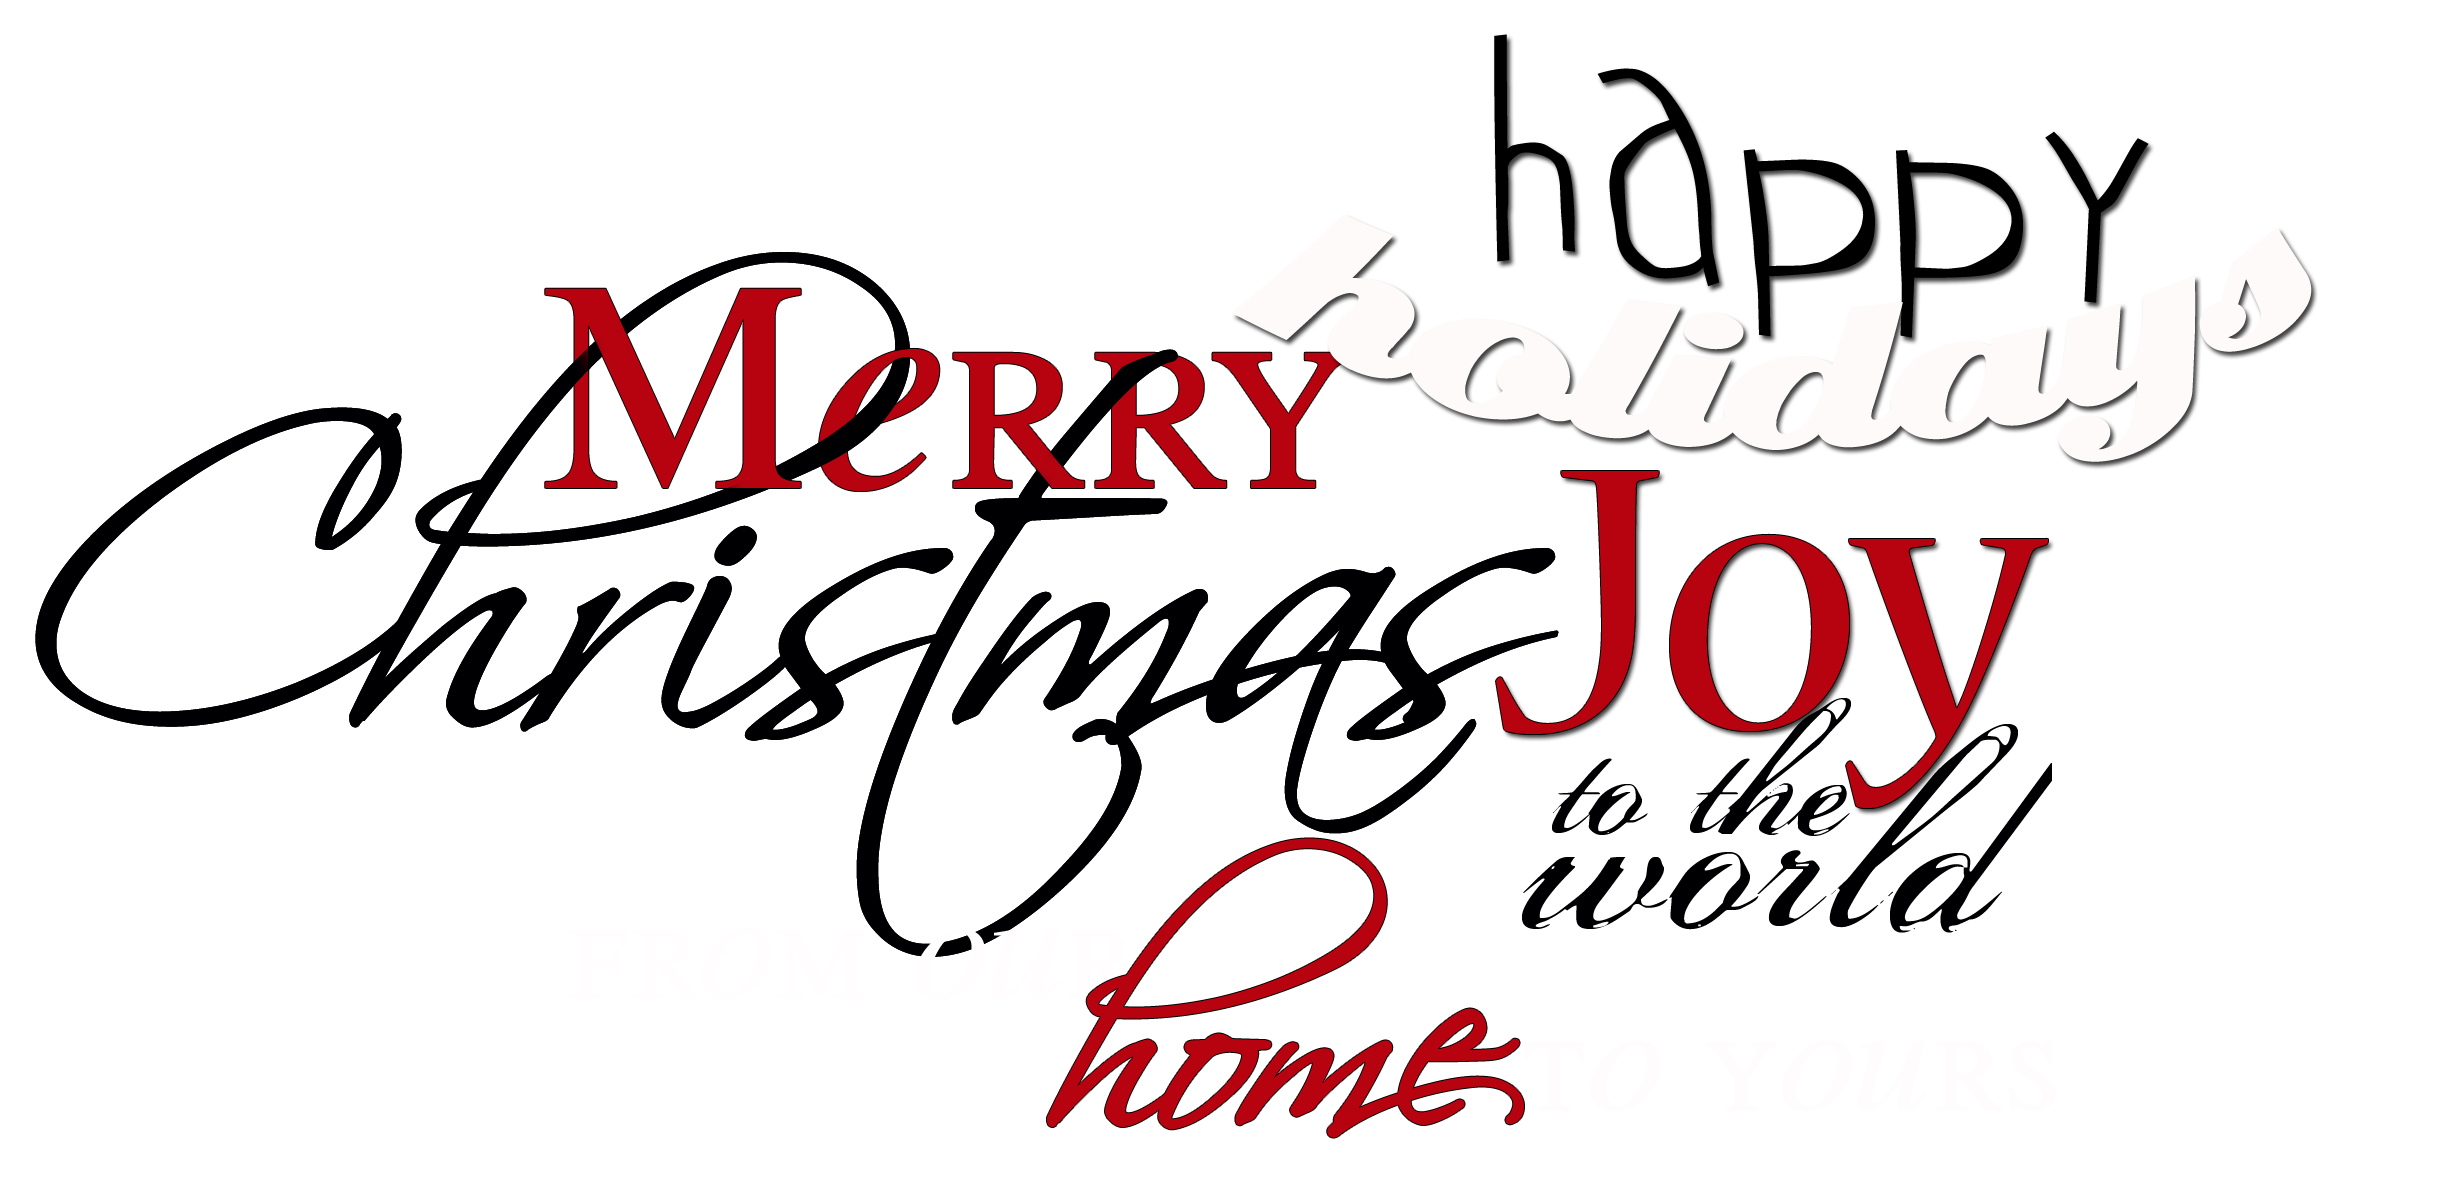 Word Art for Christmas Cards